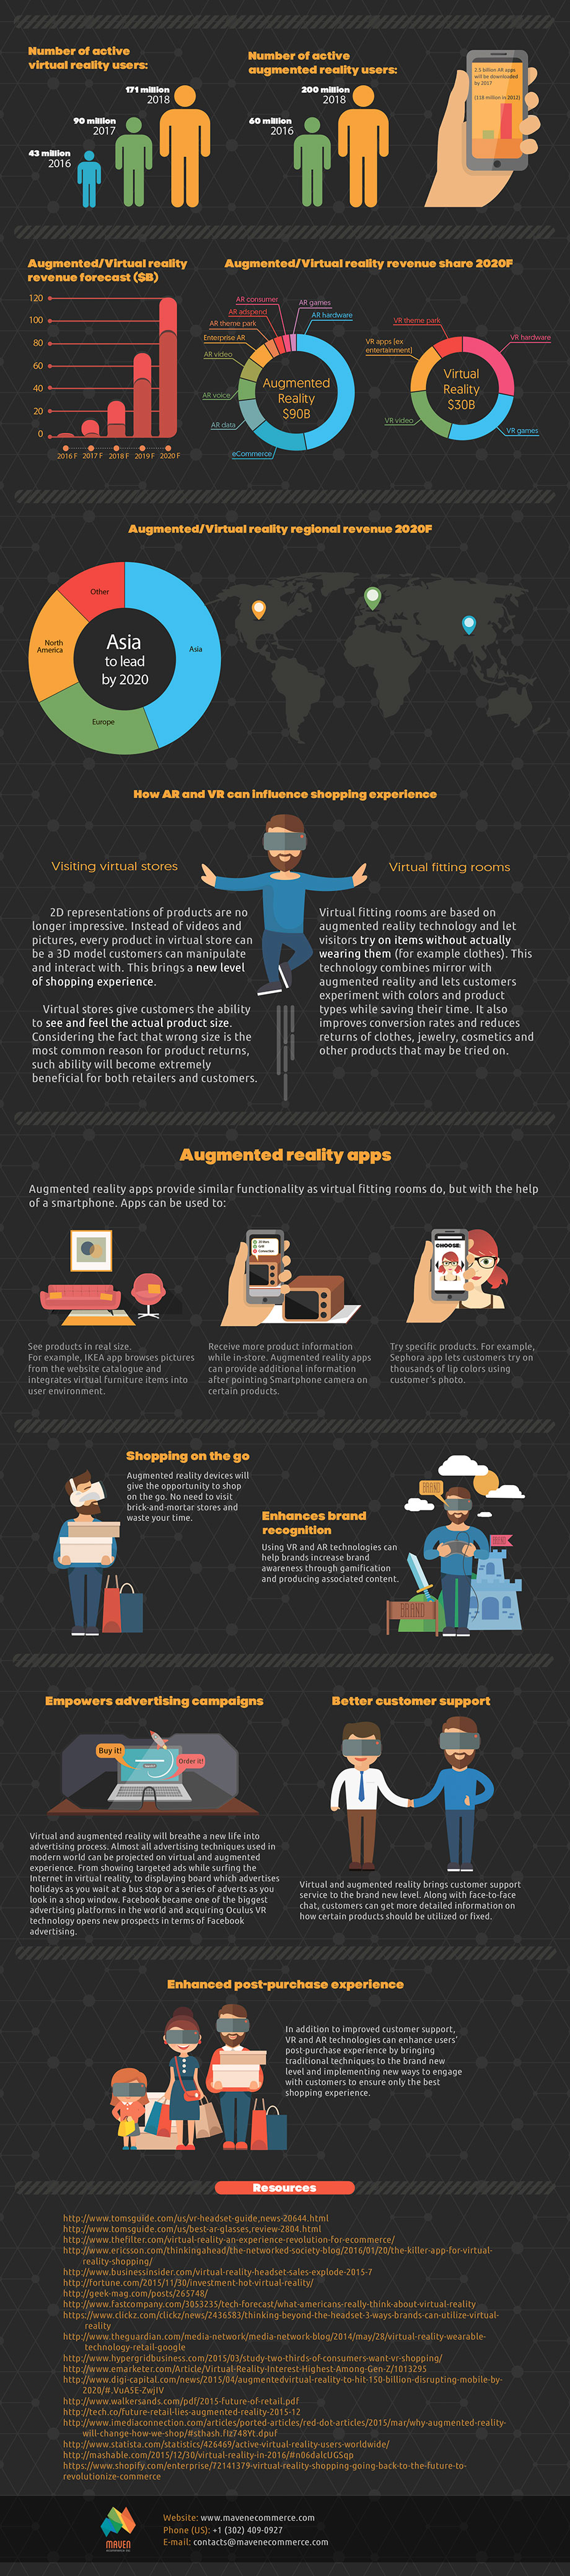 How Virtual and Augmented Reality will Change the Way We Shop (Infographic) 2